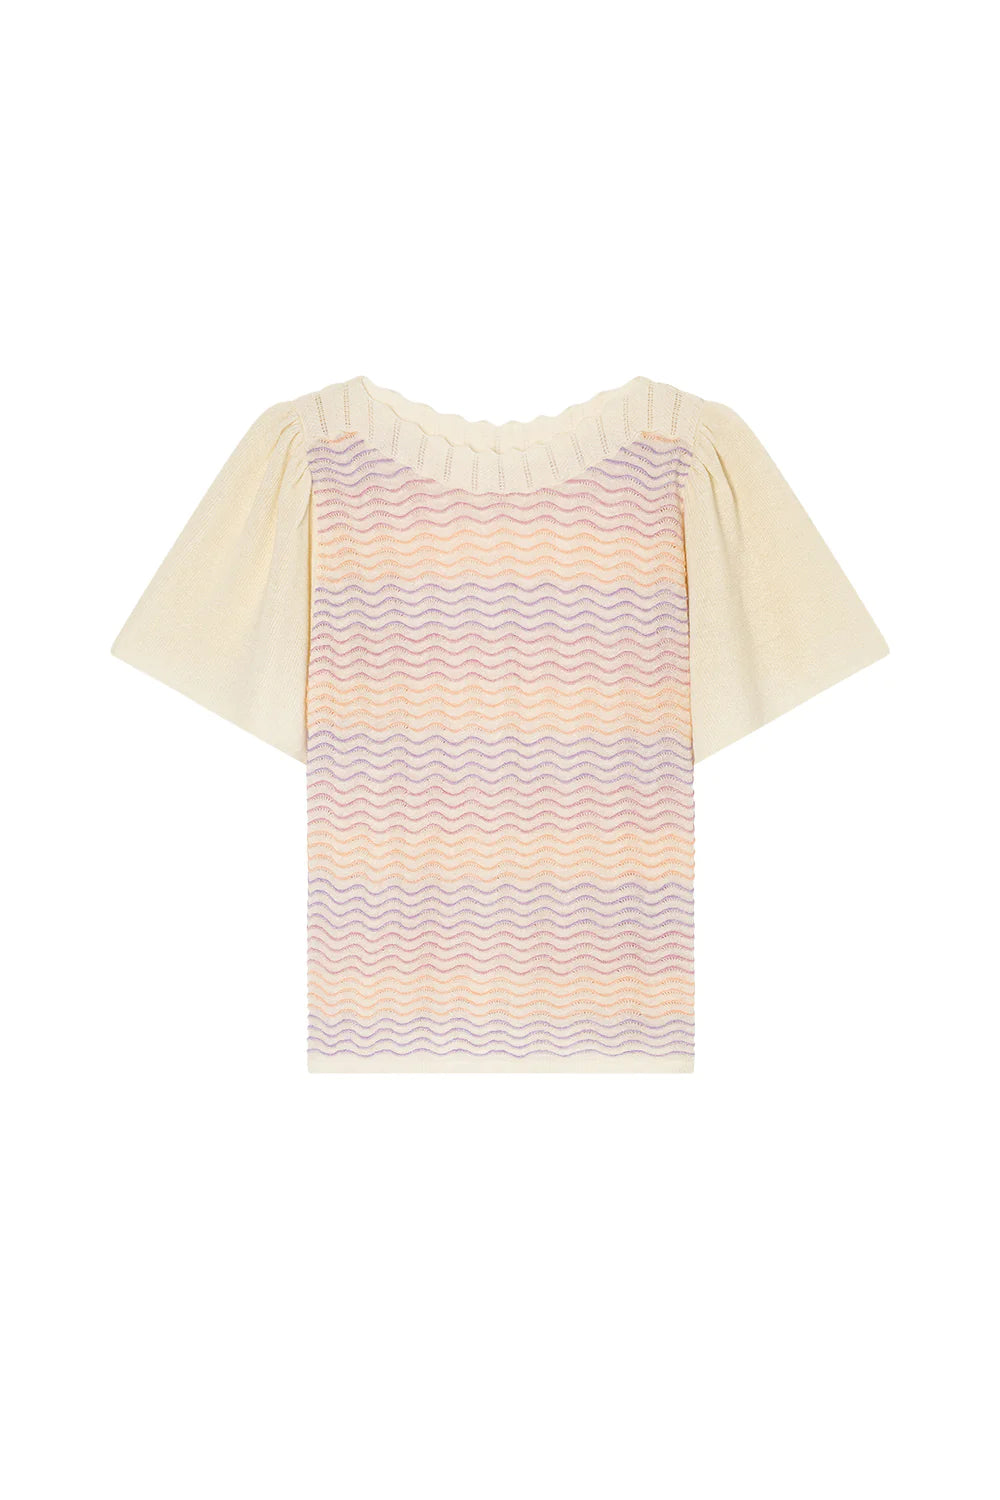 Cleo Knit Top in Spring Stripes